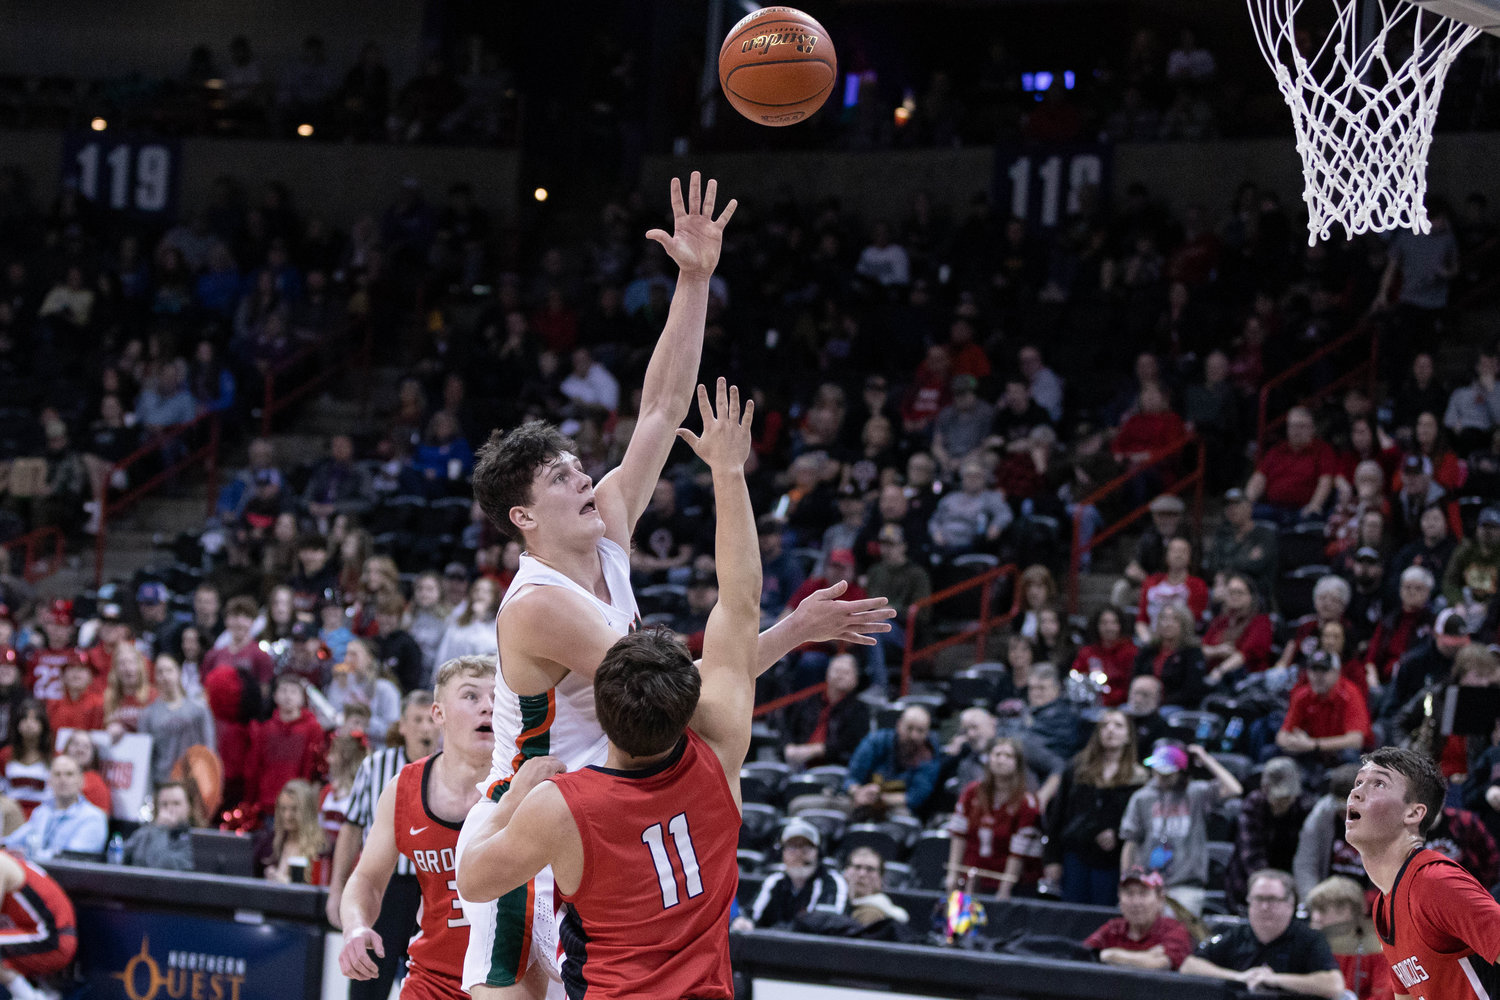 Morton-White Pass forward Hunter Hazen throws up a shot during a 51-44 defeat to Lind-Ritzville/Sprague/Washtucna in the 2B state quarterfinals at Spokane Arena March 2.